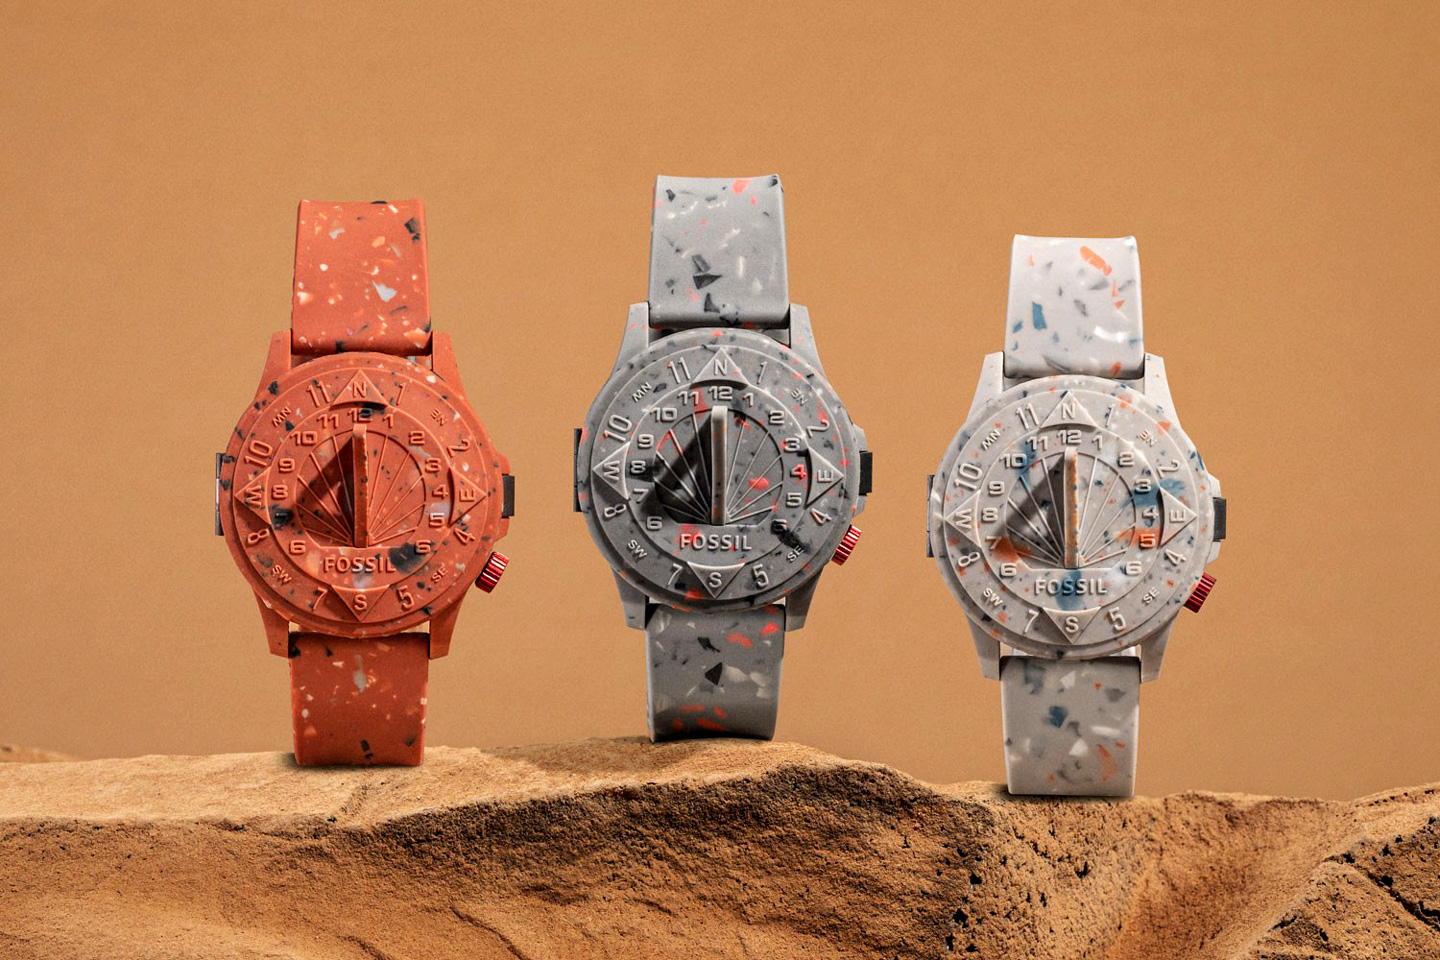 #Fossil’s collab with STAPLE results in a uniquely retro-futuristic timepiece with a sundial and holograms